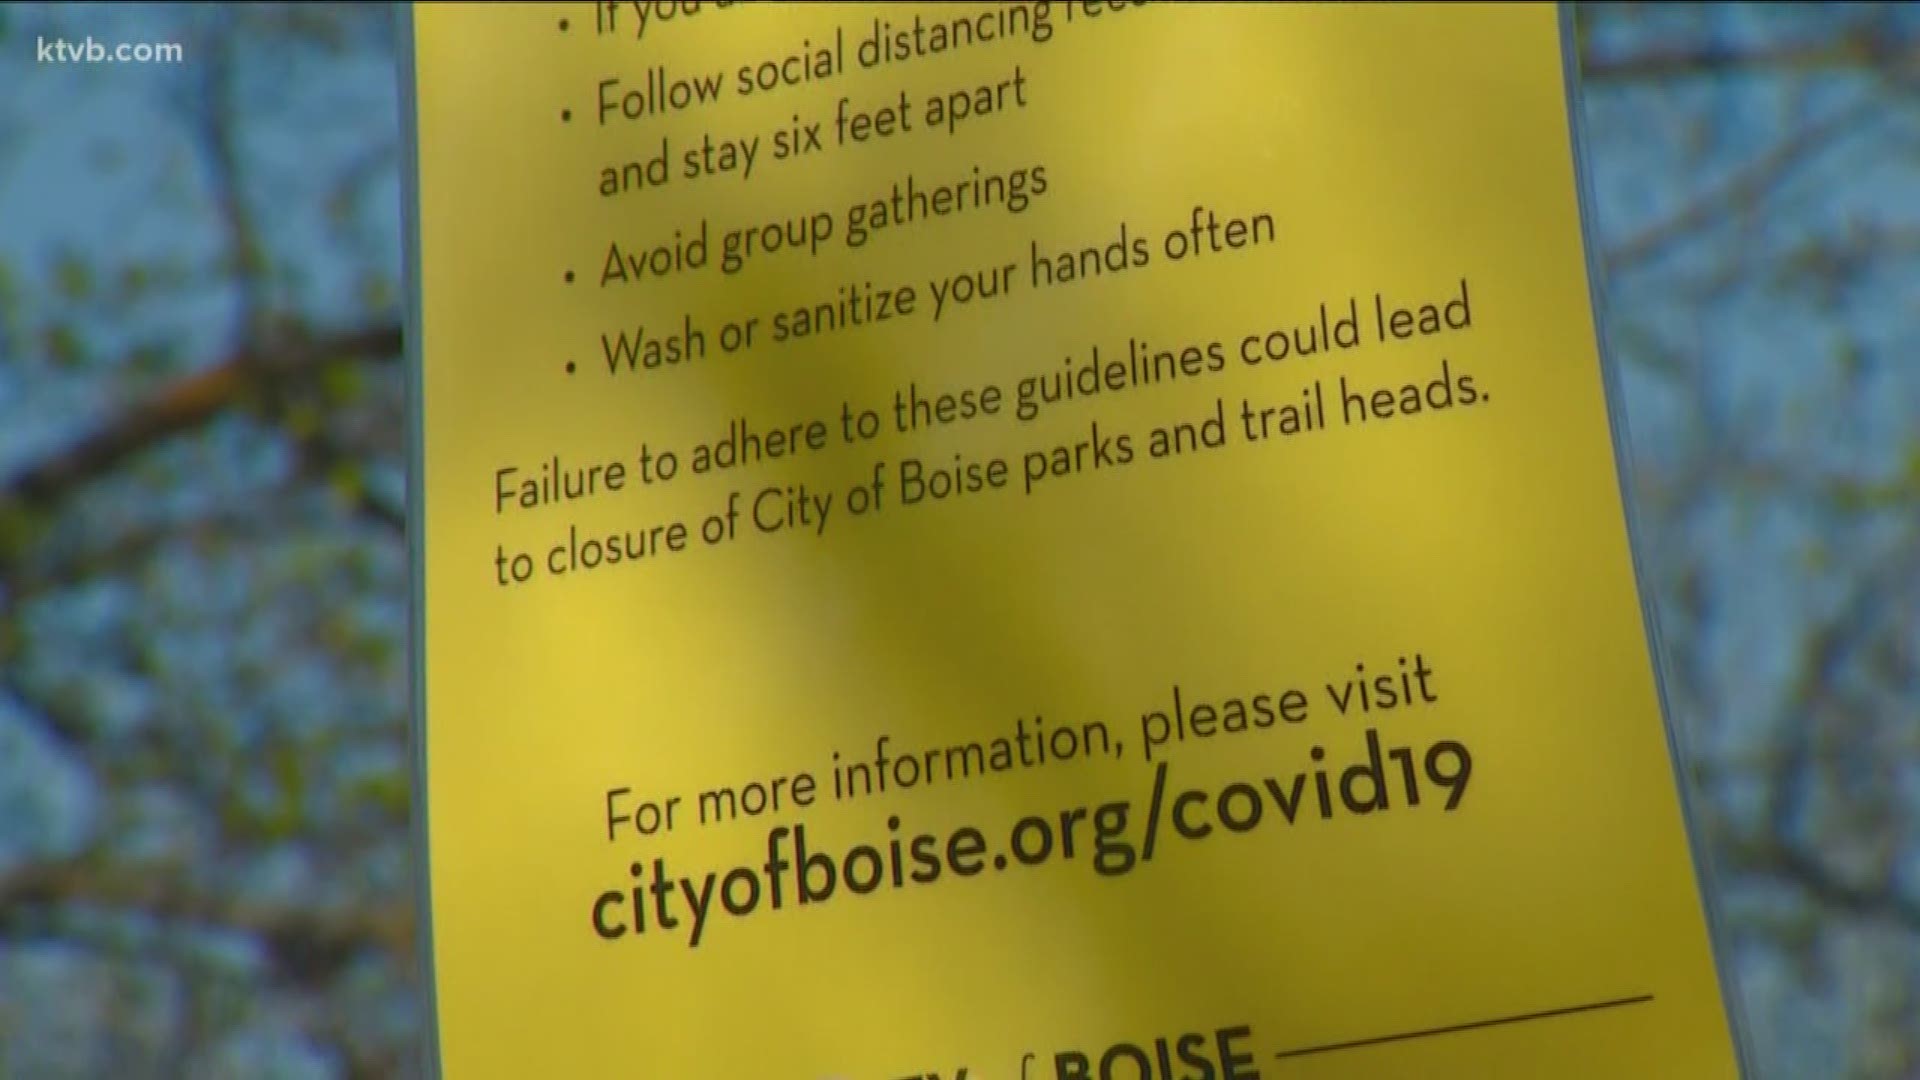 The city plans to have more staff in parks and foothills to remind people of guidelines to prevent spread of COVID-19.